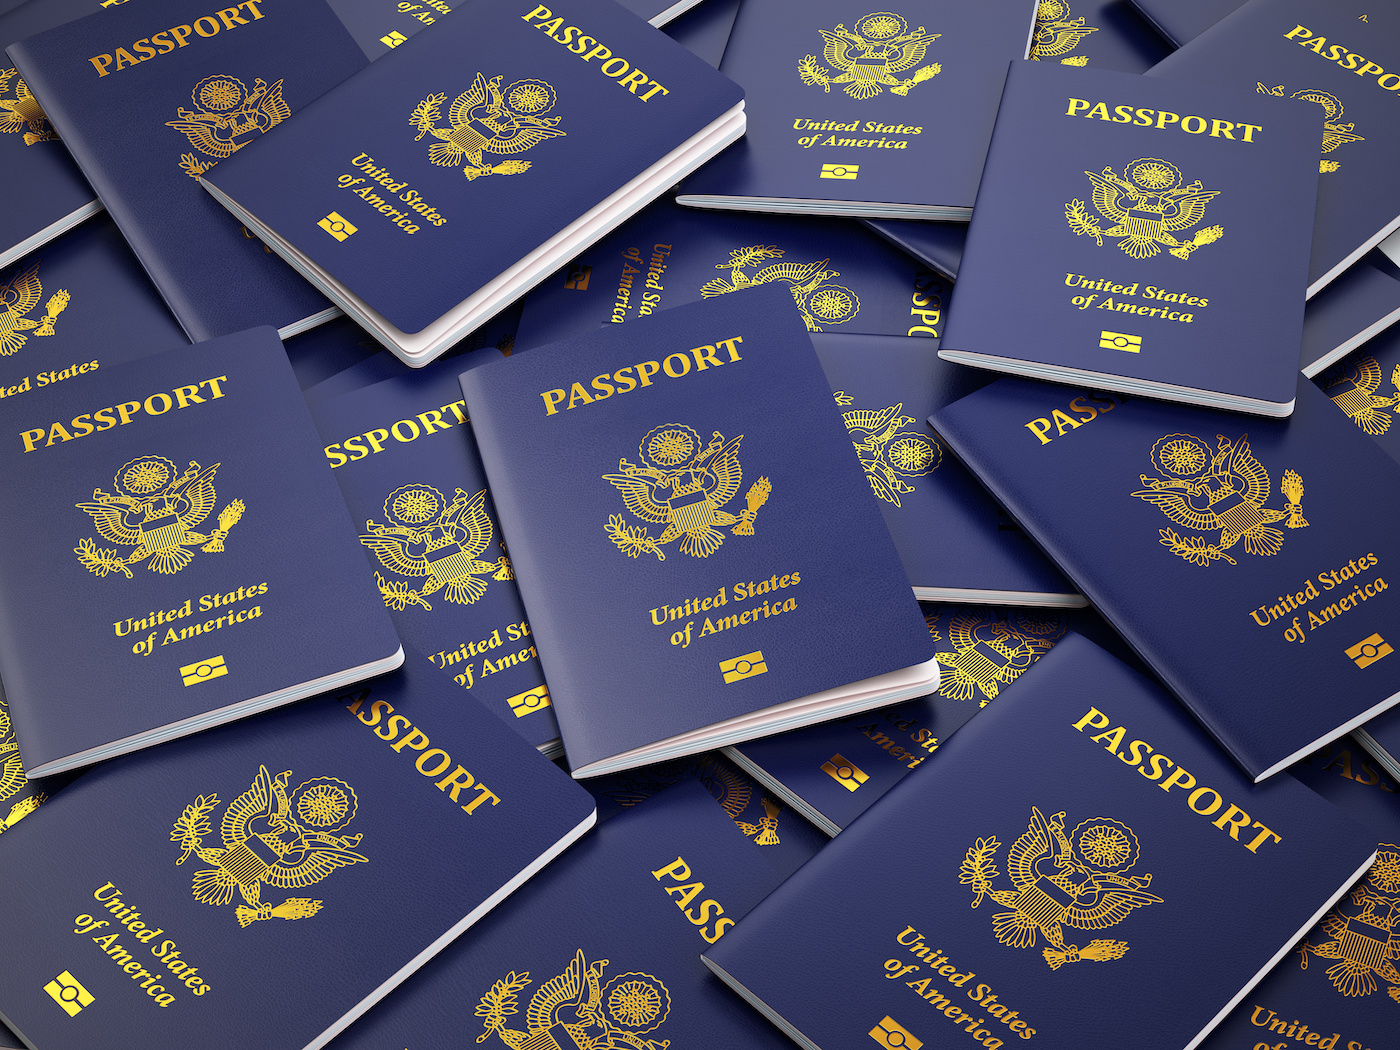 How Are US Passports Processed? Here is an Easy Infographic to Show How